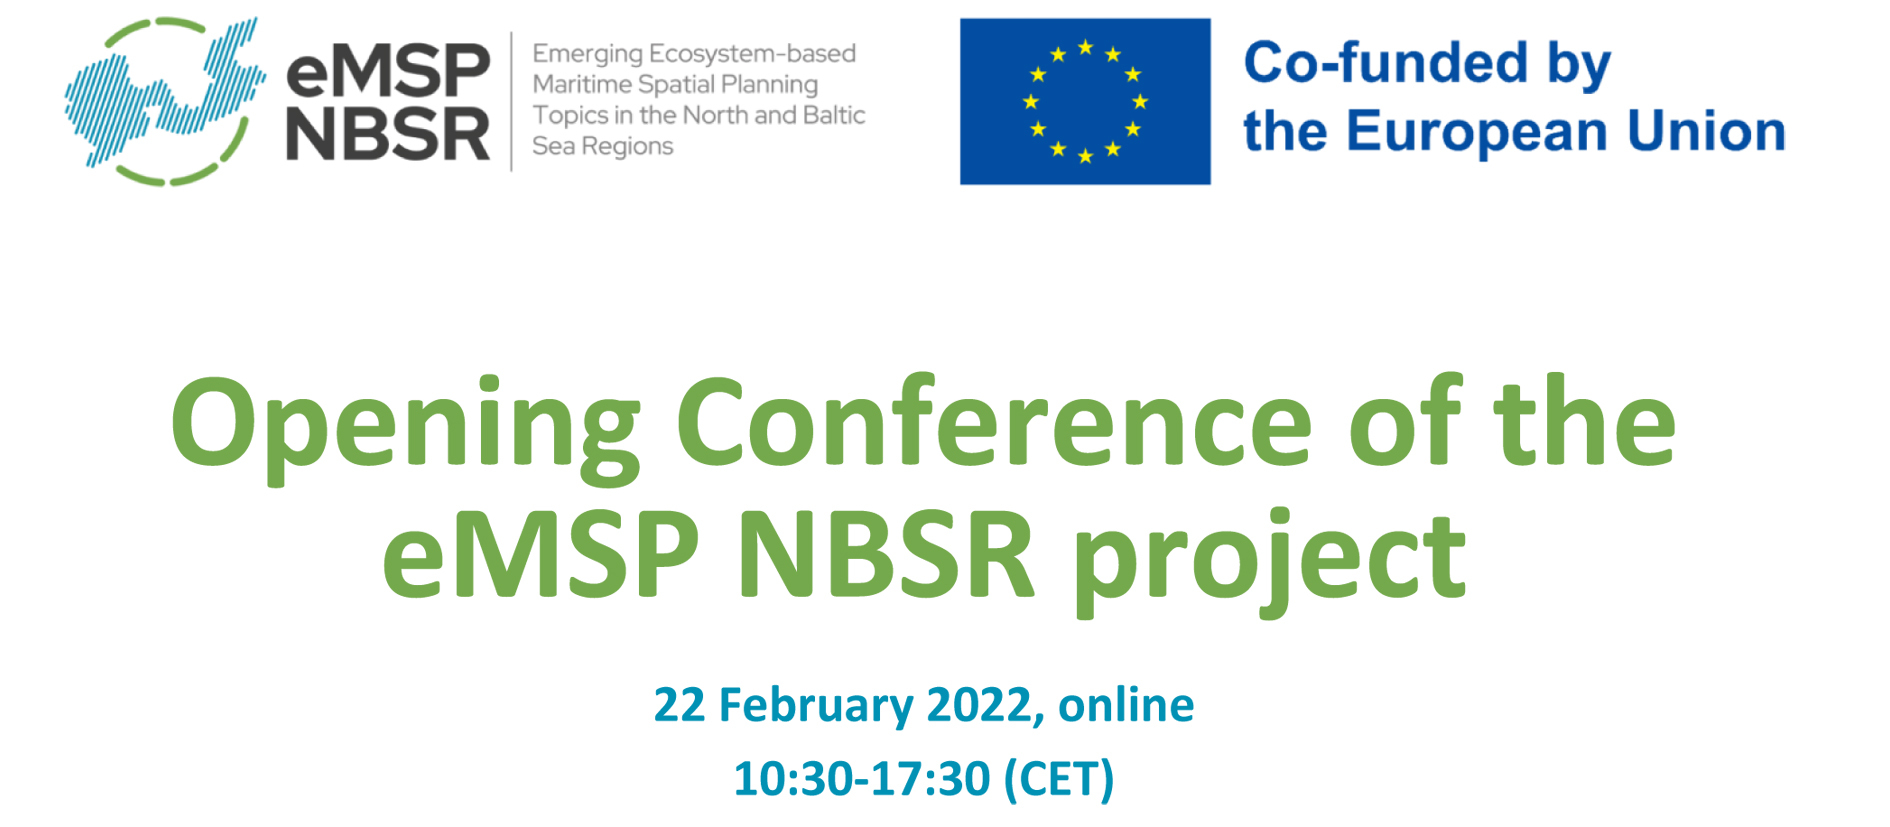 Opening Conference of the eMSP NBSR project